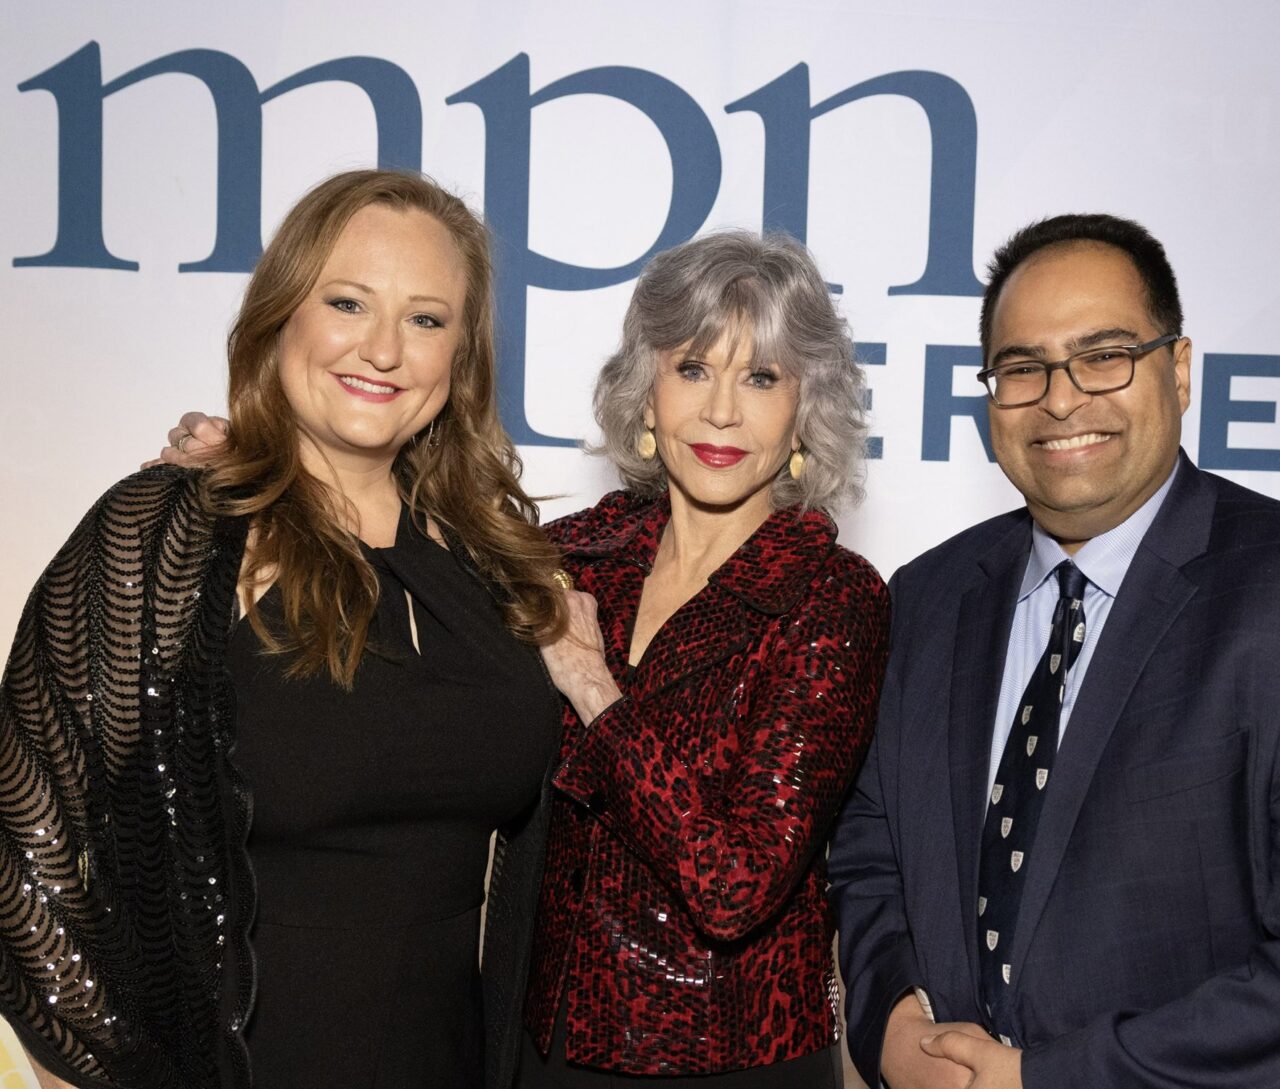 Naveen Pemmaraju: Thank you to Jane Fonda for helping us raise so much awareness for research on behalf of our patients with MPNs